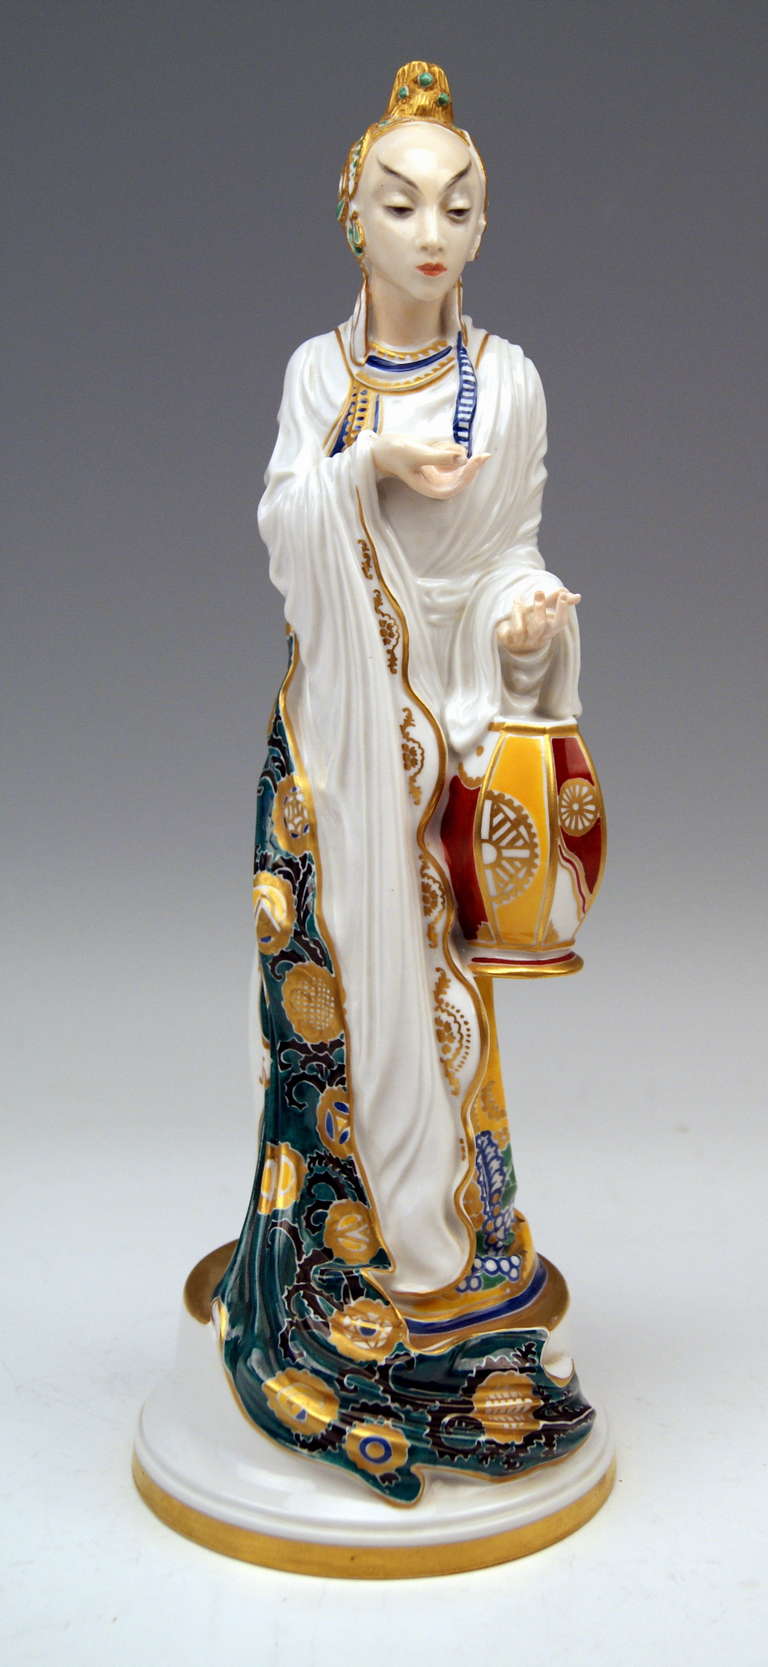 ROSENTHAL RAREST FIGURINE OF A CHINESE LADY
THE ORIGINAL GERMAN TITLE IS:   TÄNZERIN TSCHAOKIUM   ( = LADY DANCER CHAOKIUM )
The Chinese woman wearing a long dress covered with mantle holds a Chinese lantern in left hand. The woman's garments are